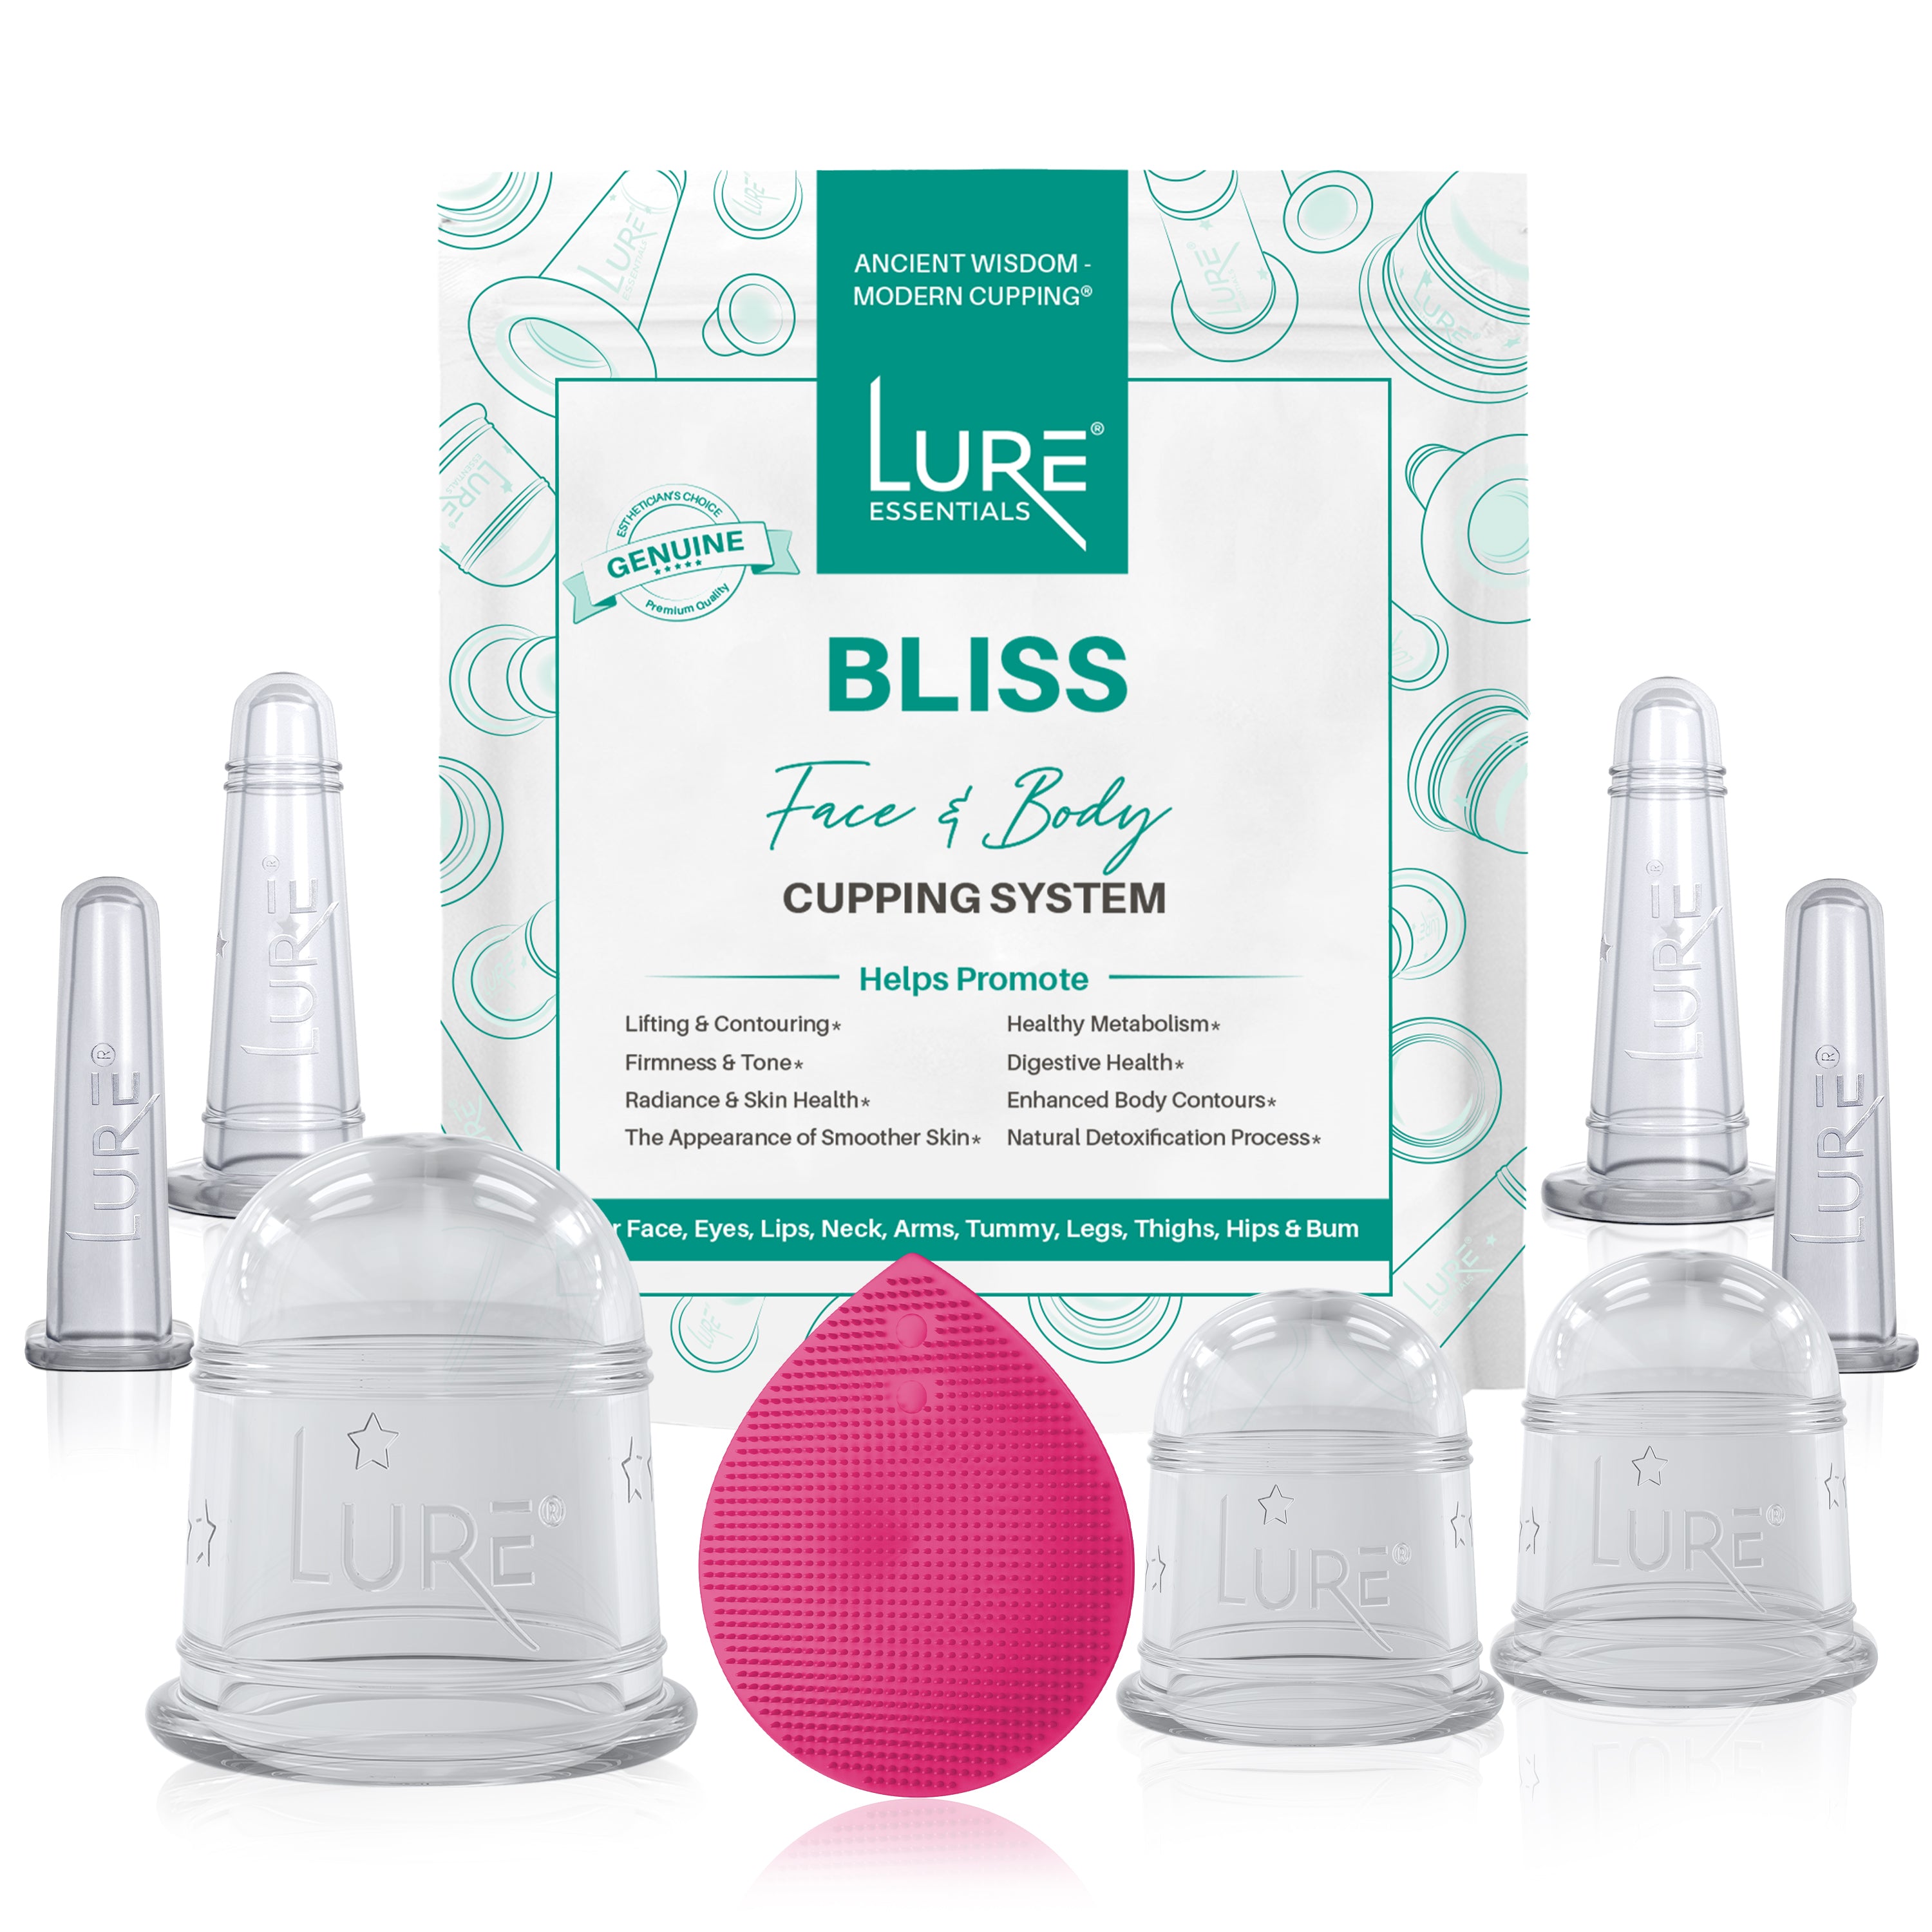 Lure Bliss Body & Face Eight Piece Cupping Kit